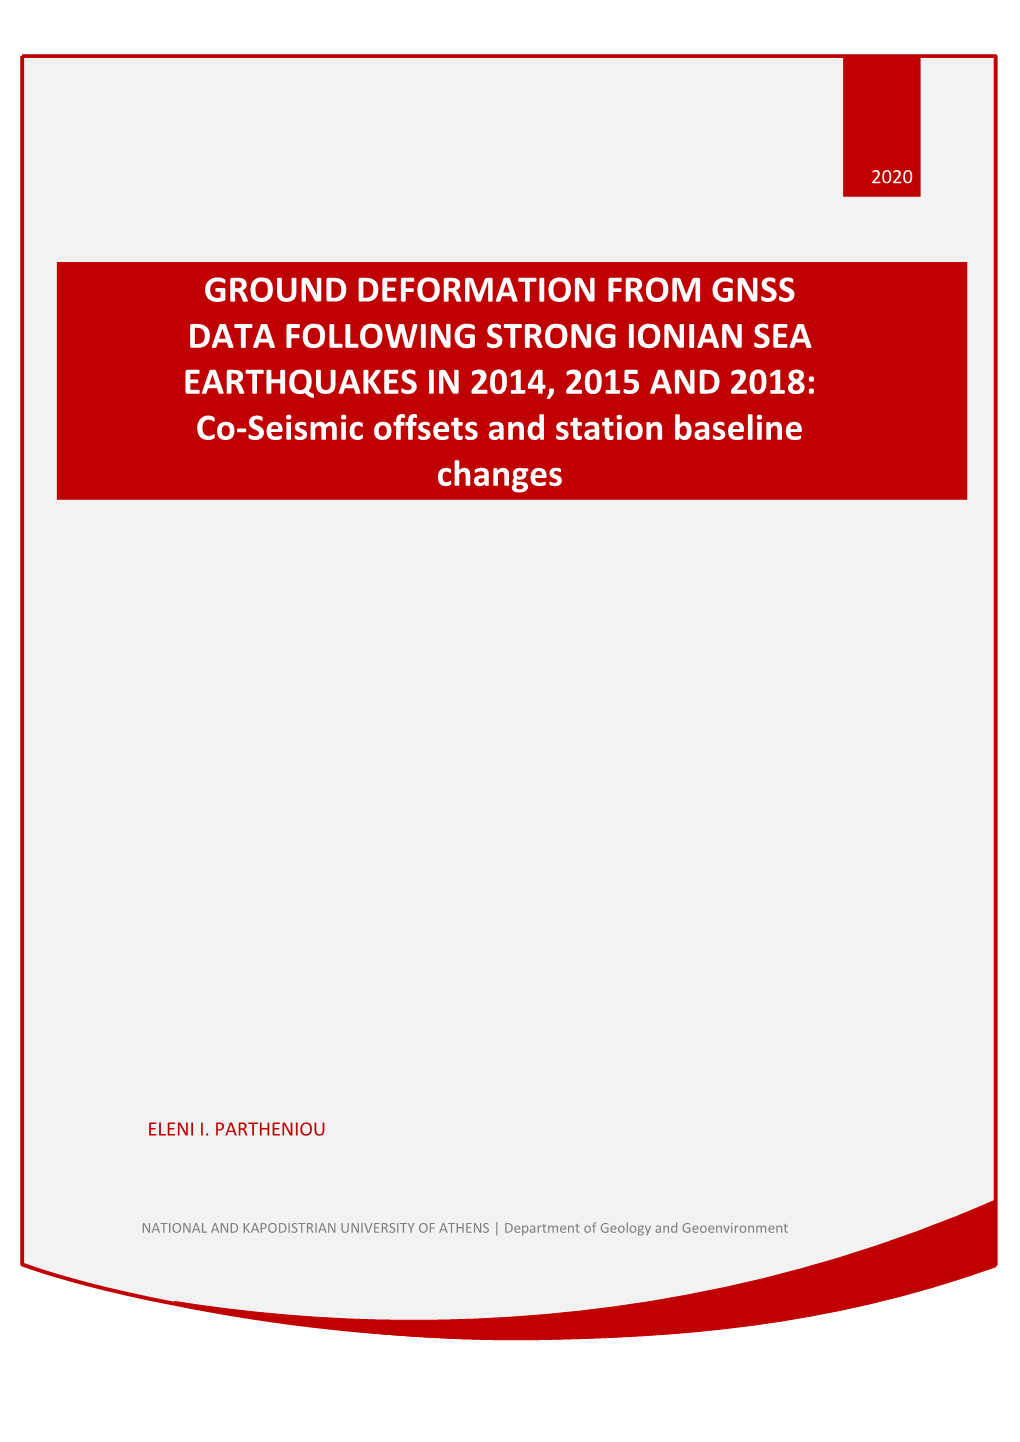 GROUND DEFORMATION from GNSS DATA FOLLOWING STRONG IONIAN SEA EARTHQUAKES in 2014, 2015 and 2018: Co-Seismic Offsets and Station Baseline Changes